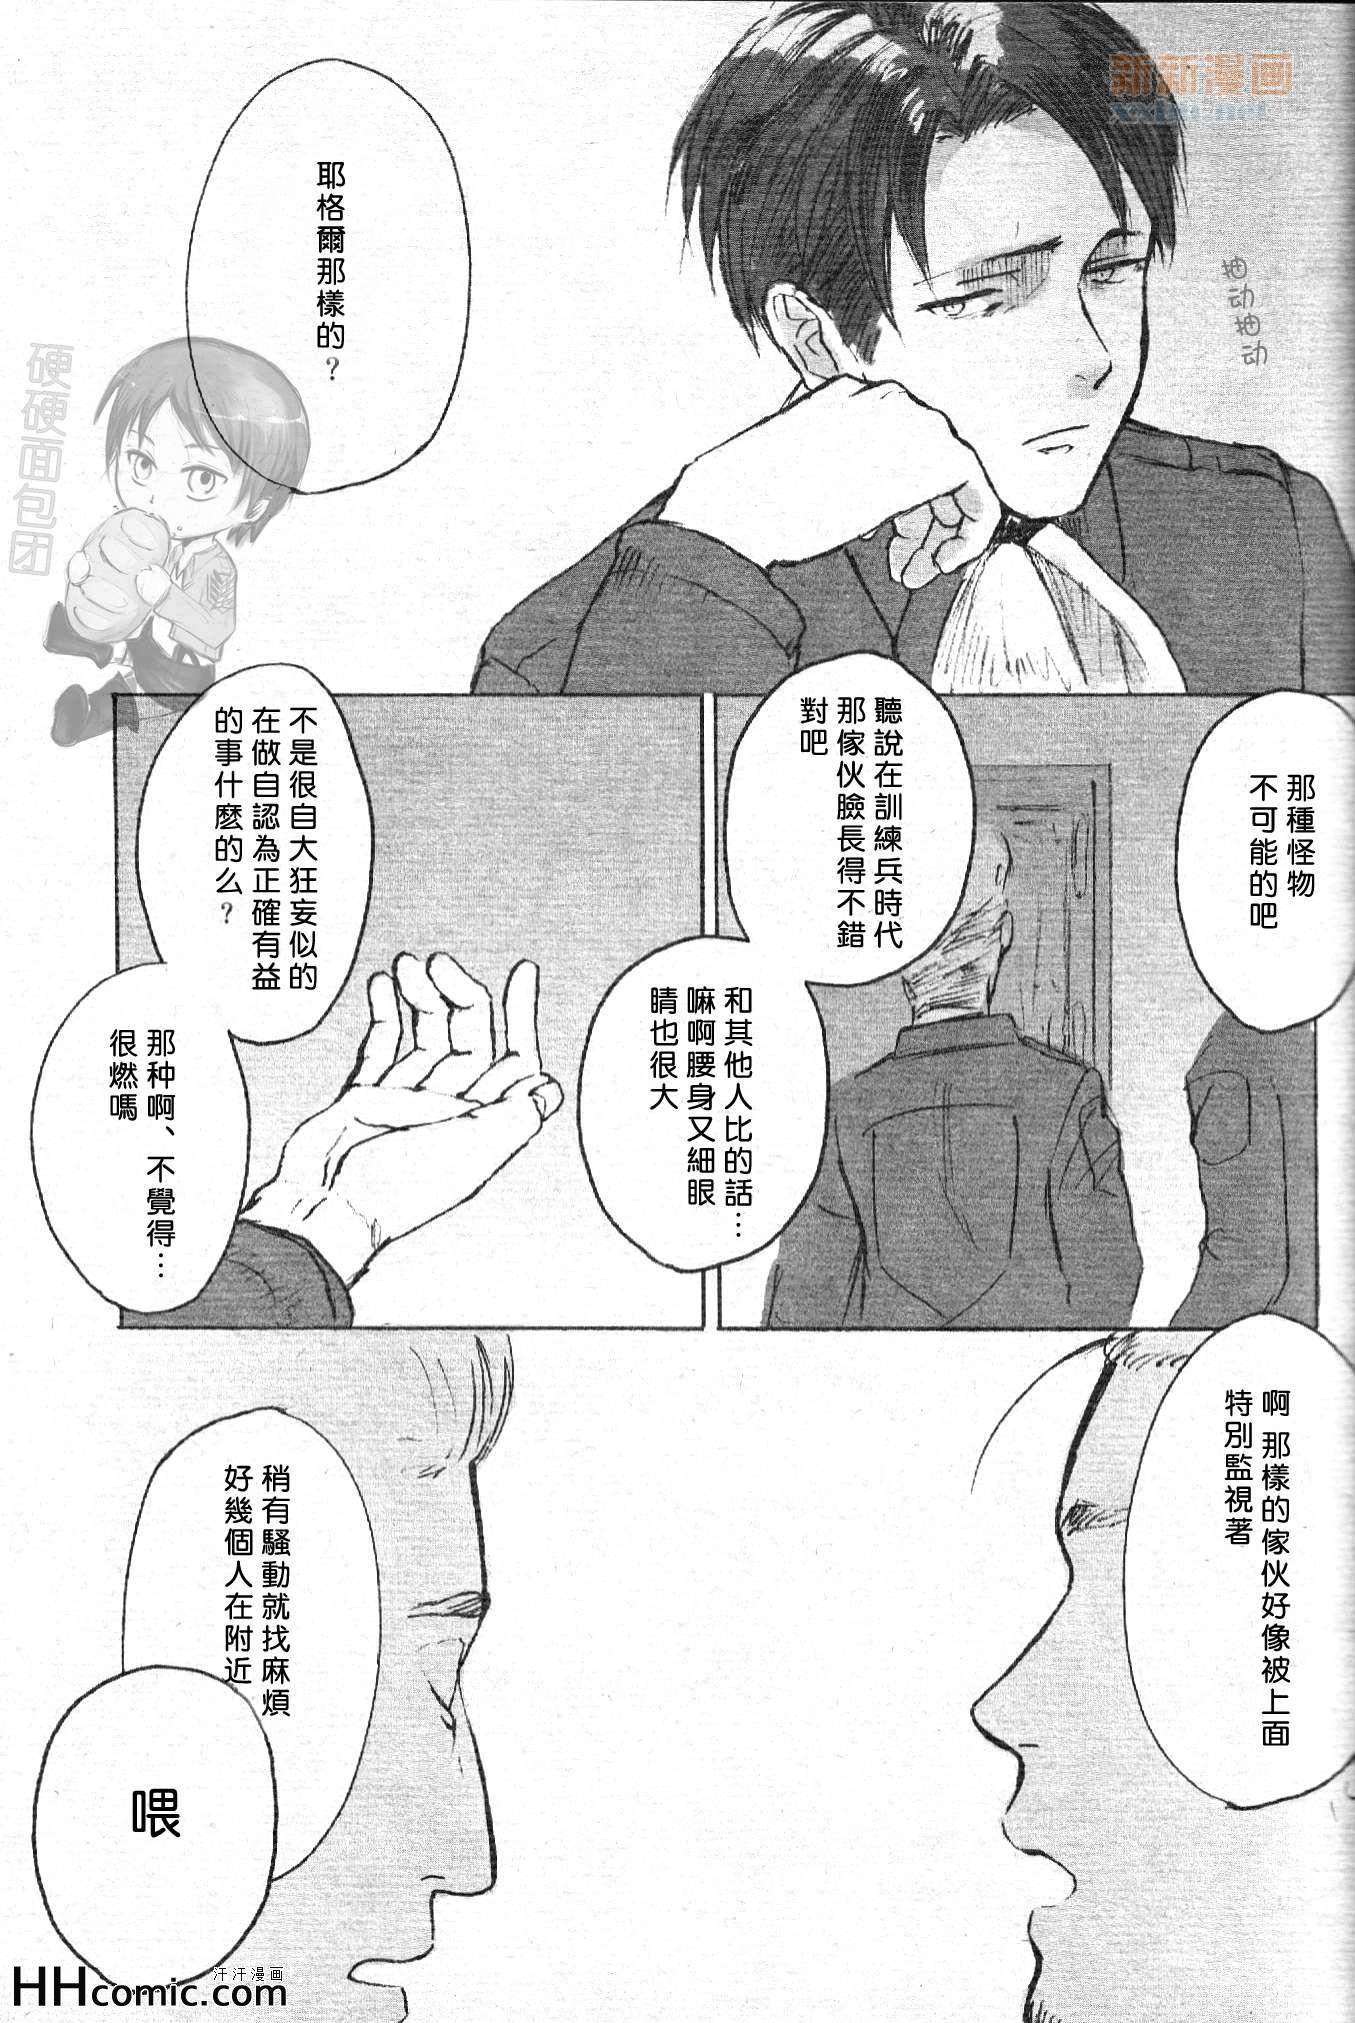 《a fat lot you know》漫画 01集